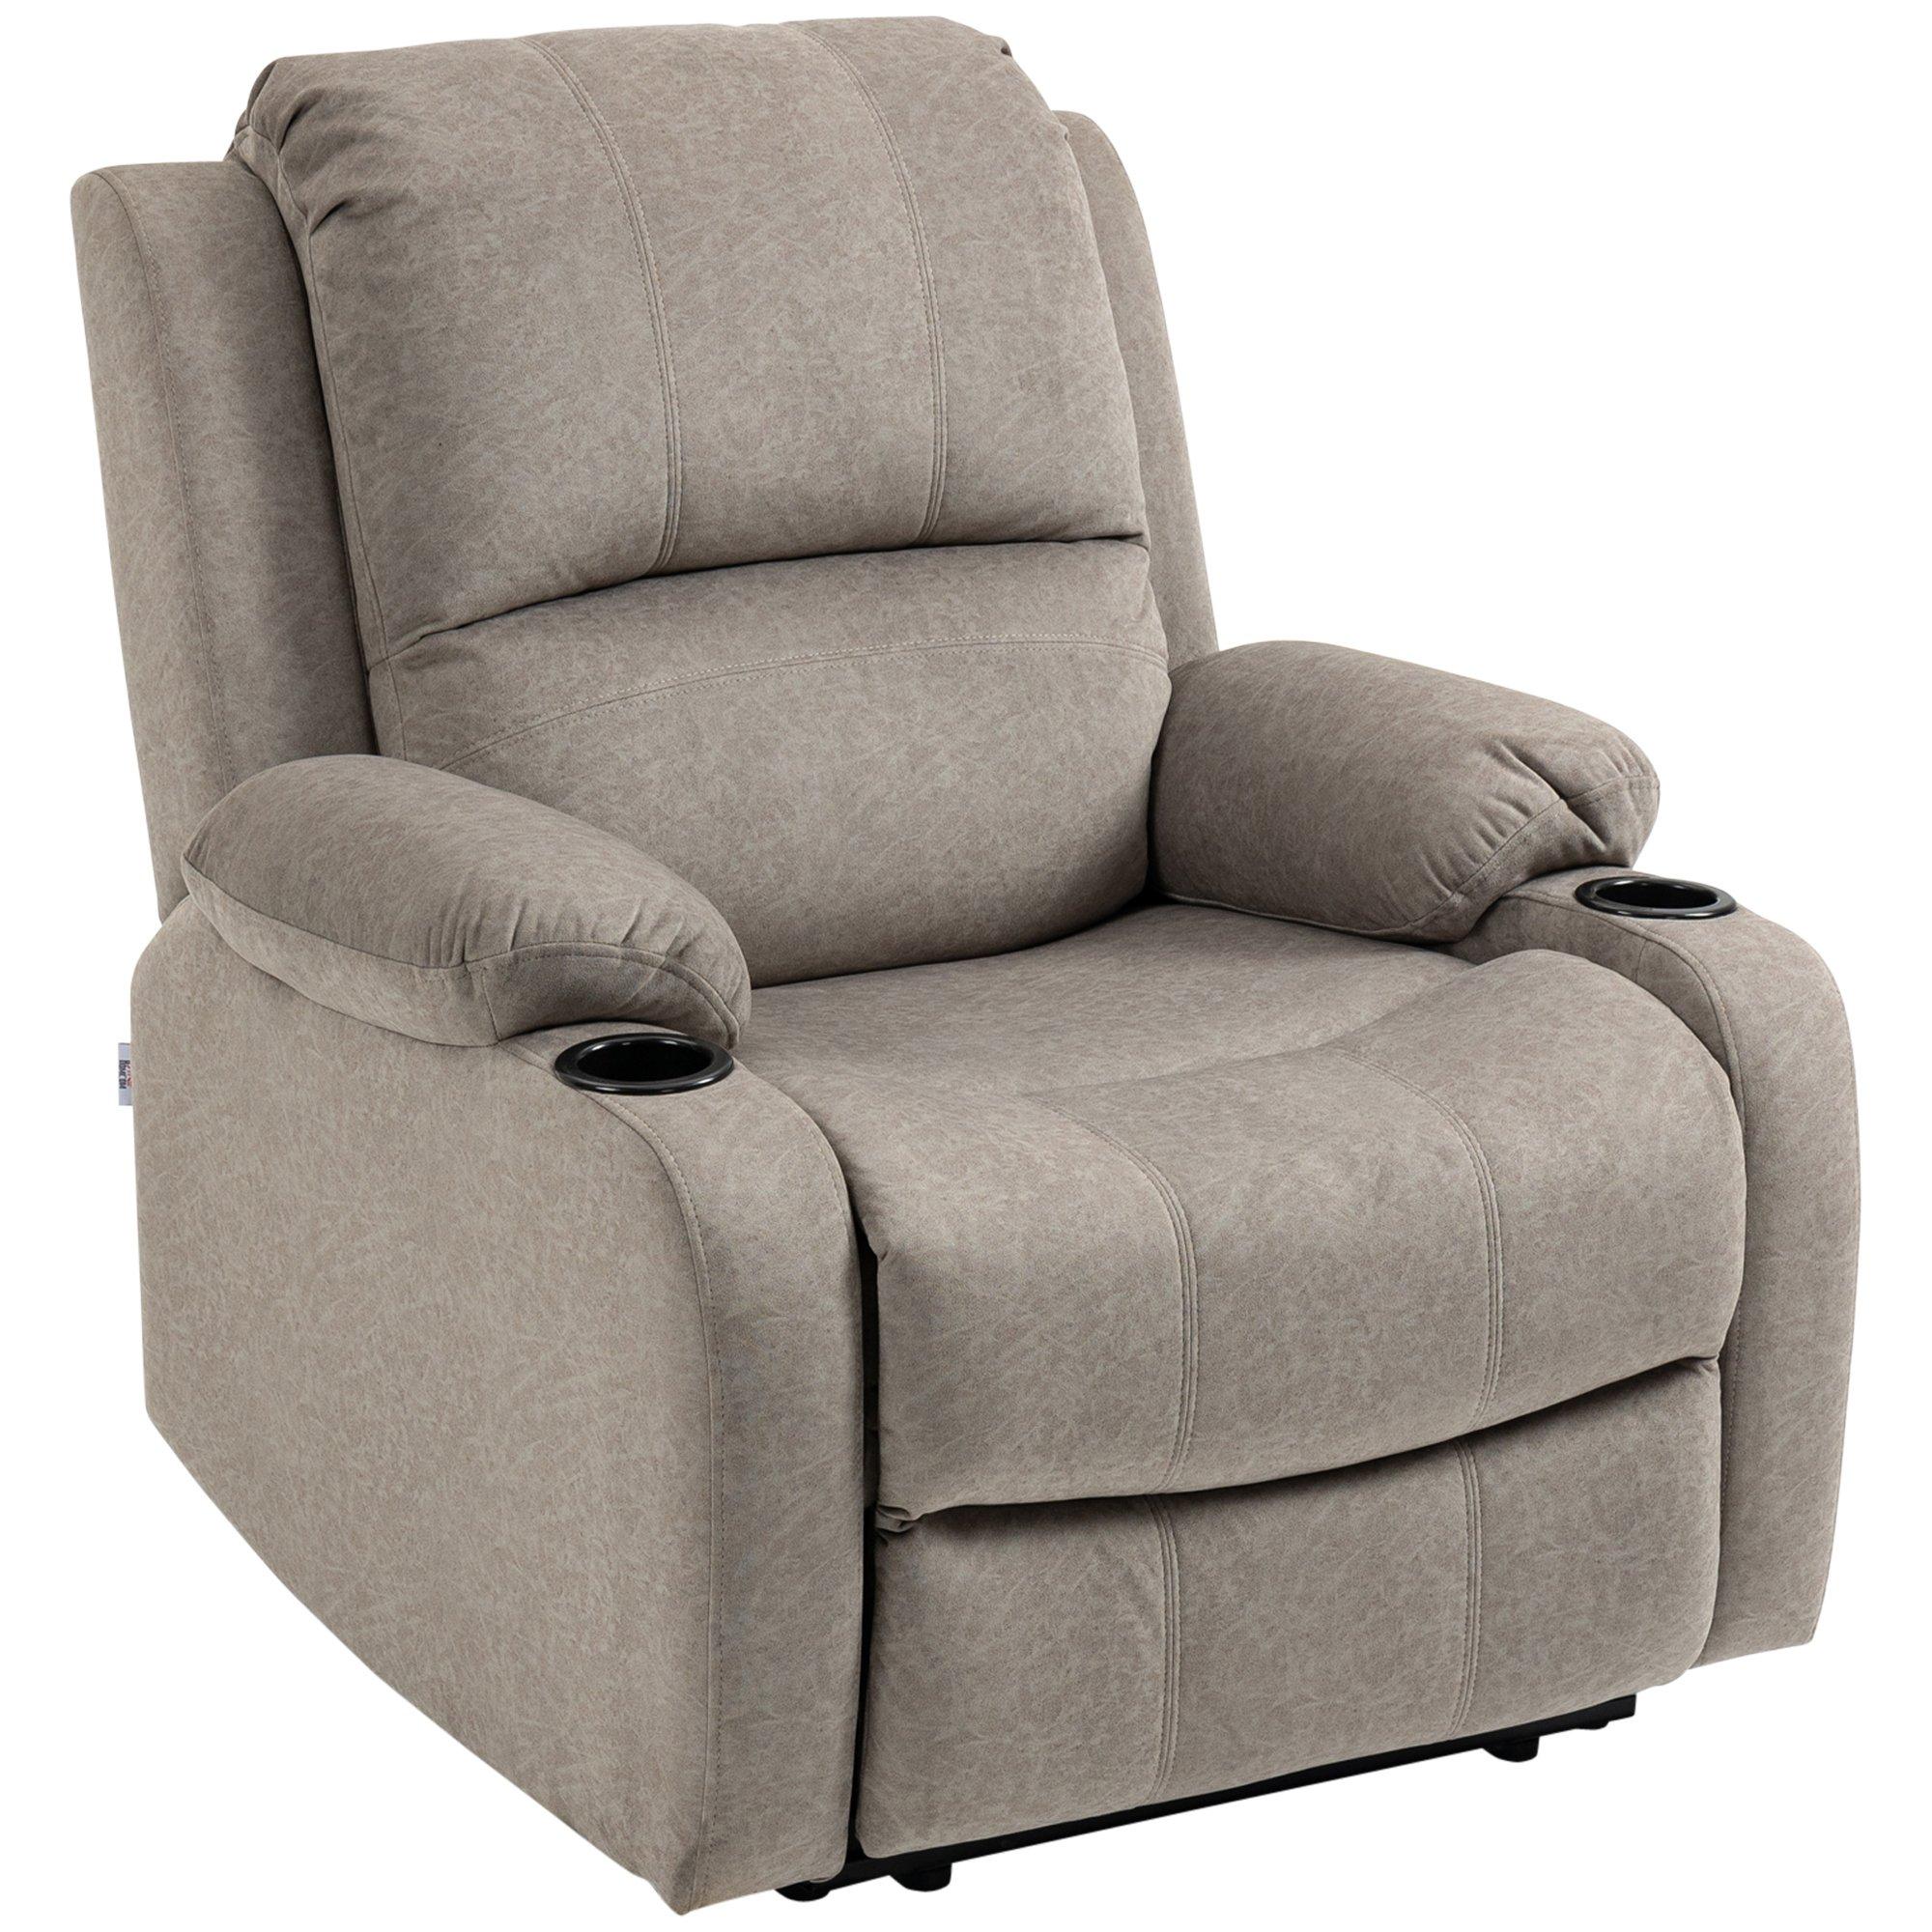 Recliner Chairs for Living Room, Microfibre Cloth Reclining Armchair